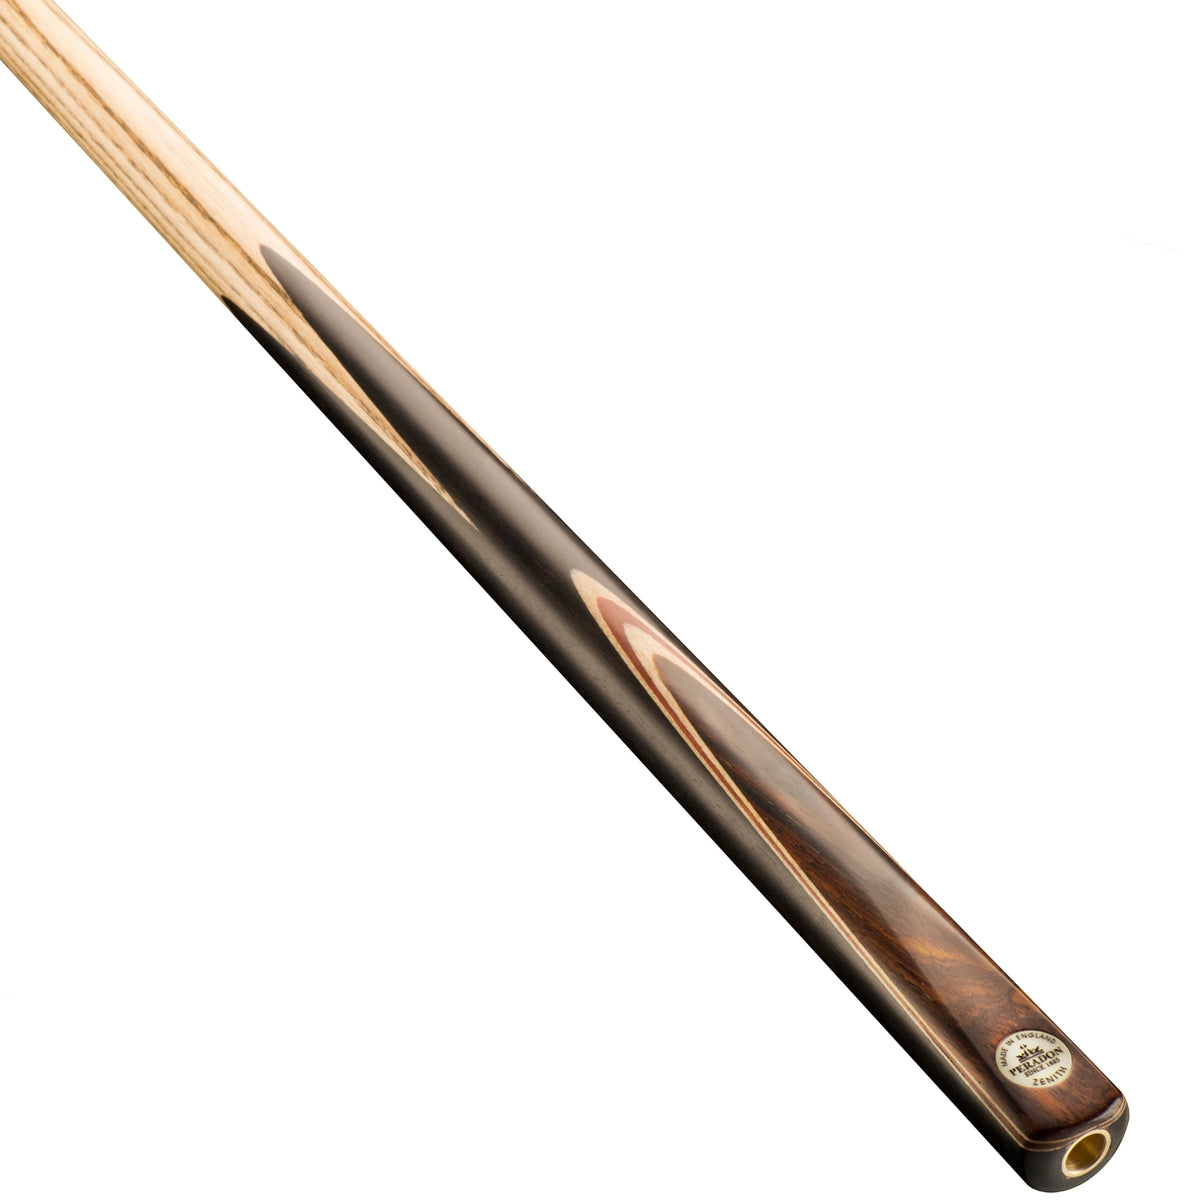 Peradon Zenith One Piece 8 Ball Pool Cue. On angle view